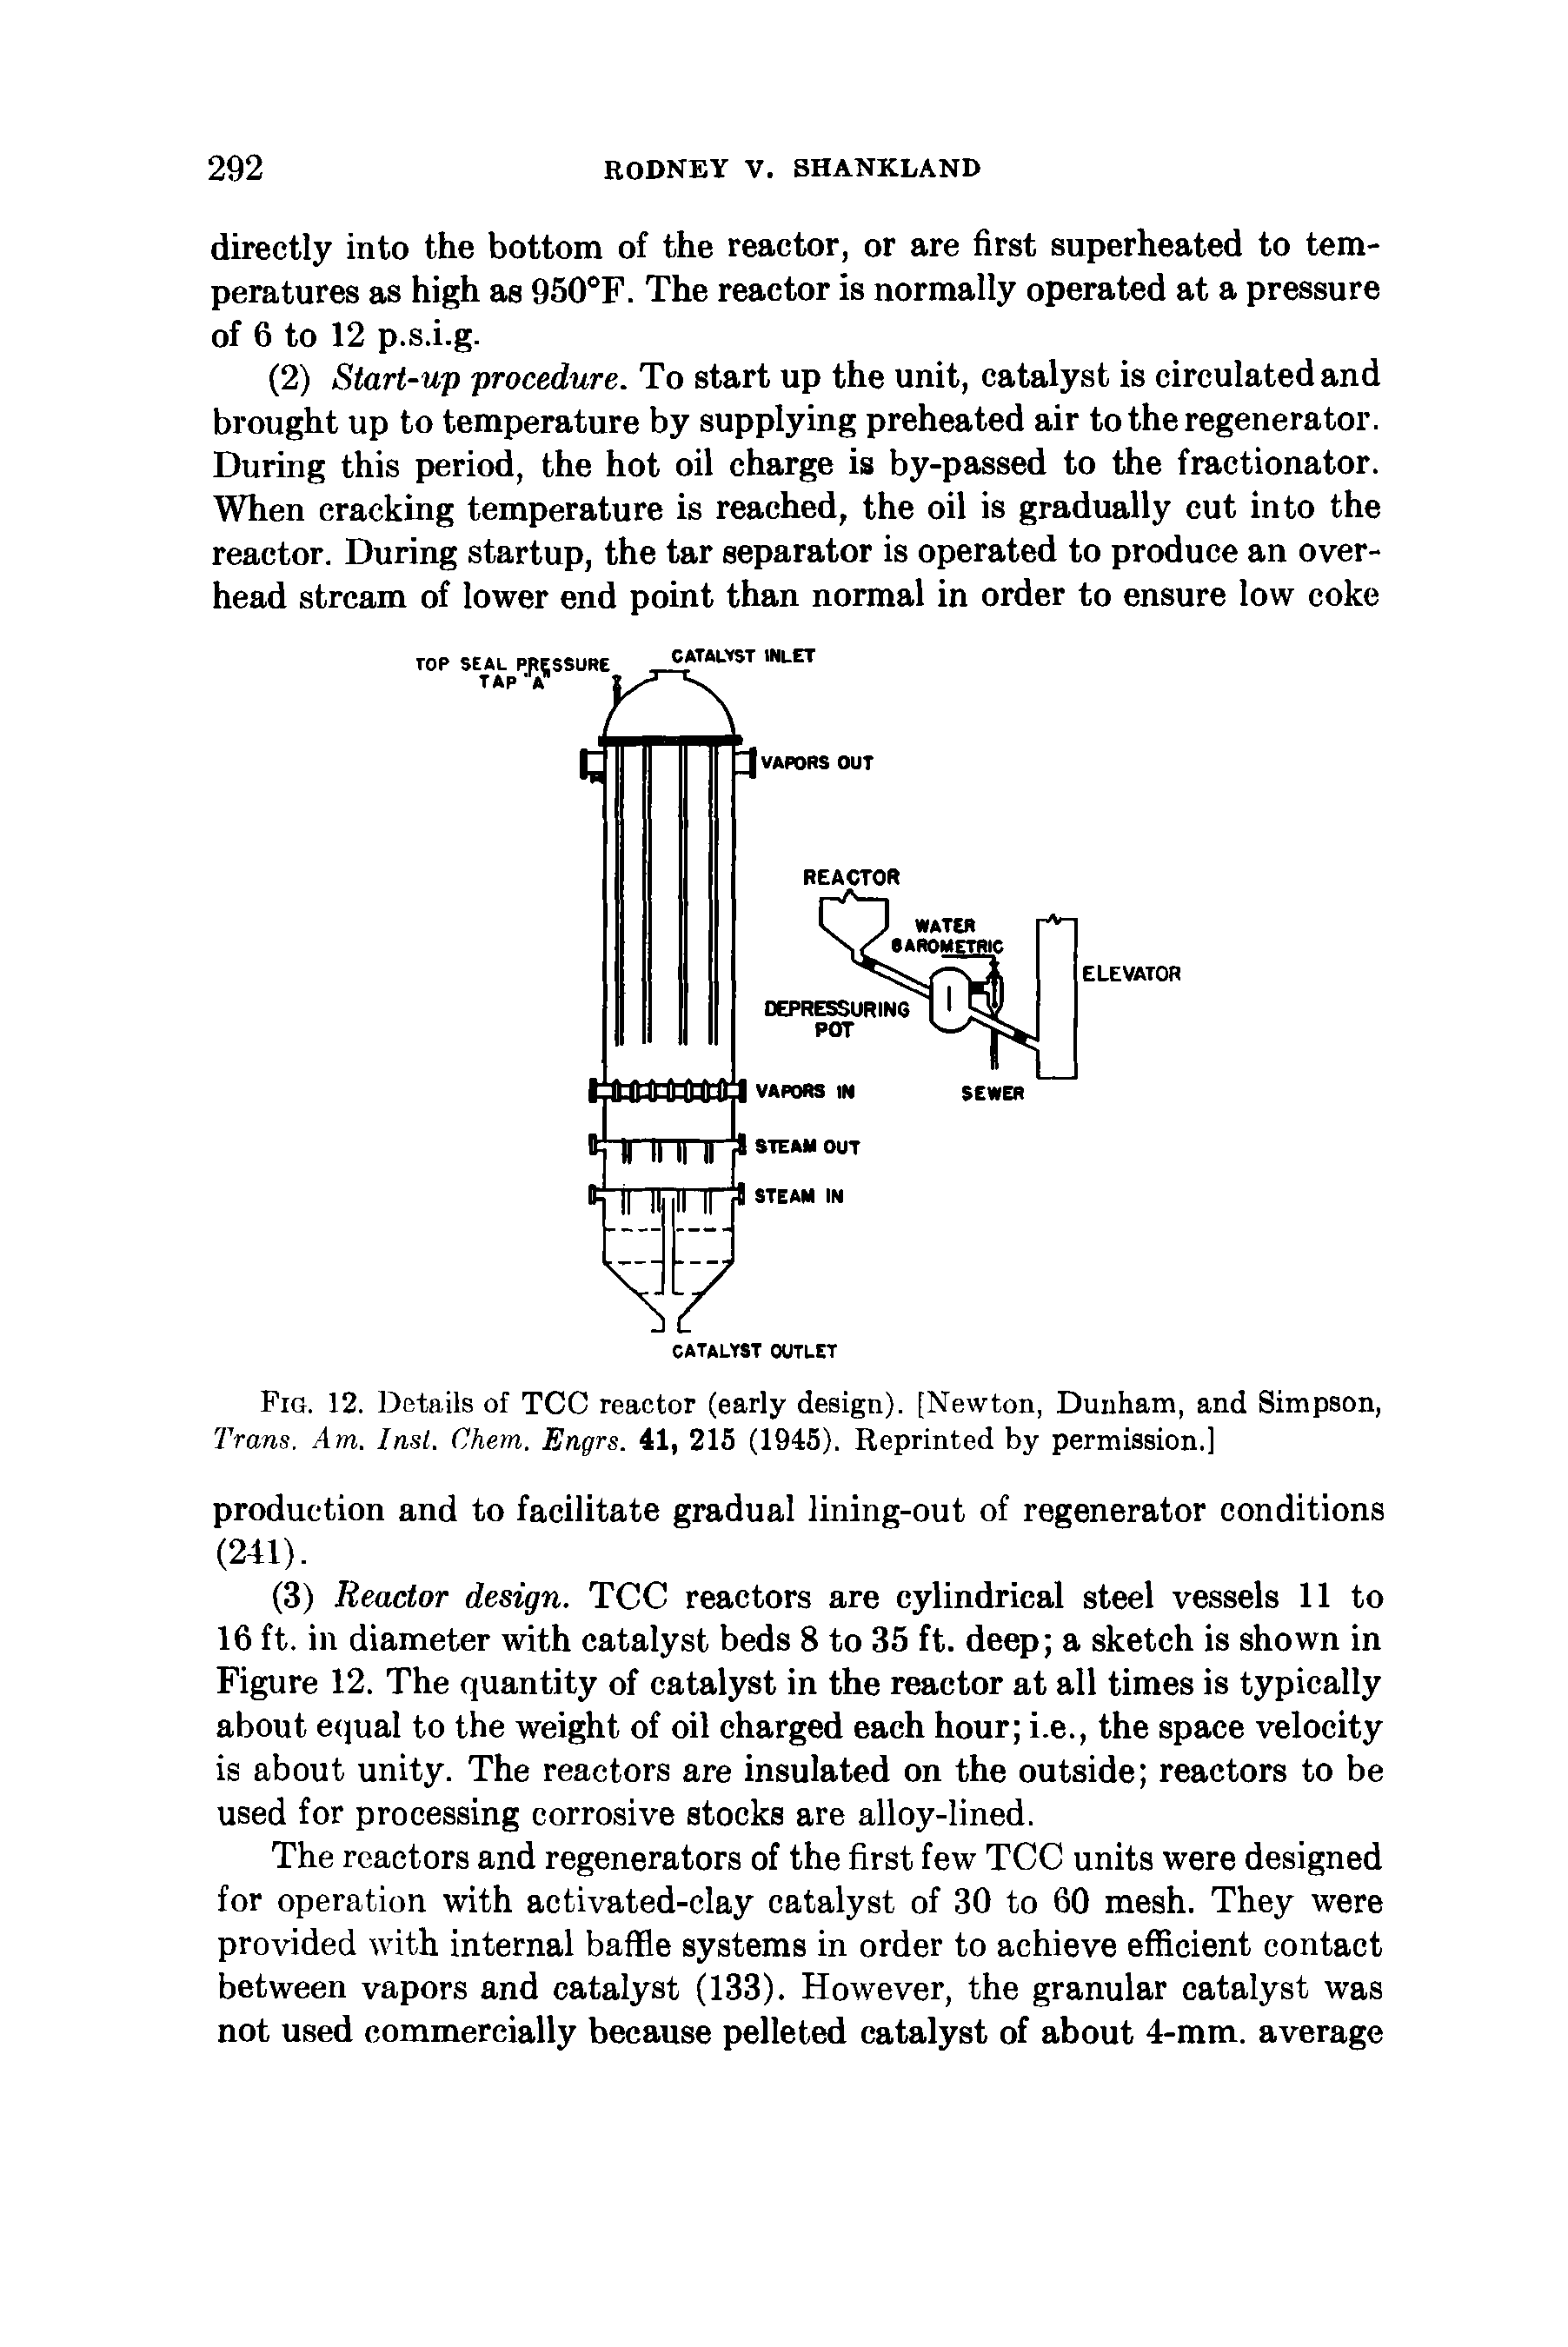 Fig. 12. Details of TCC reactor (early design). [Newton, Dunham, and Simpson, Trans. Am. Insl. Chem. Engrs. 41, 215 (1945). Reprinted by permission.]...